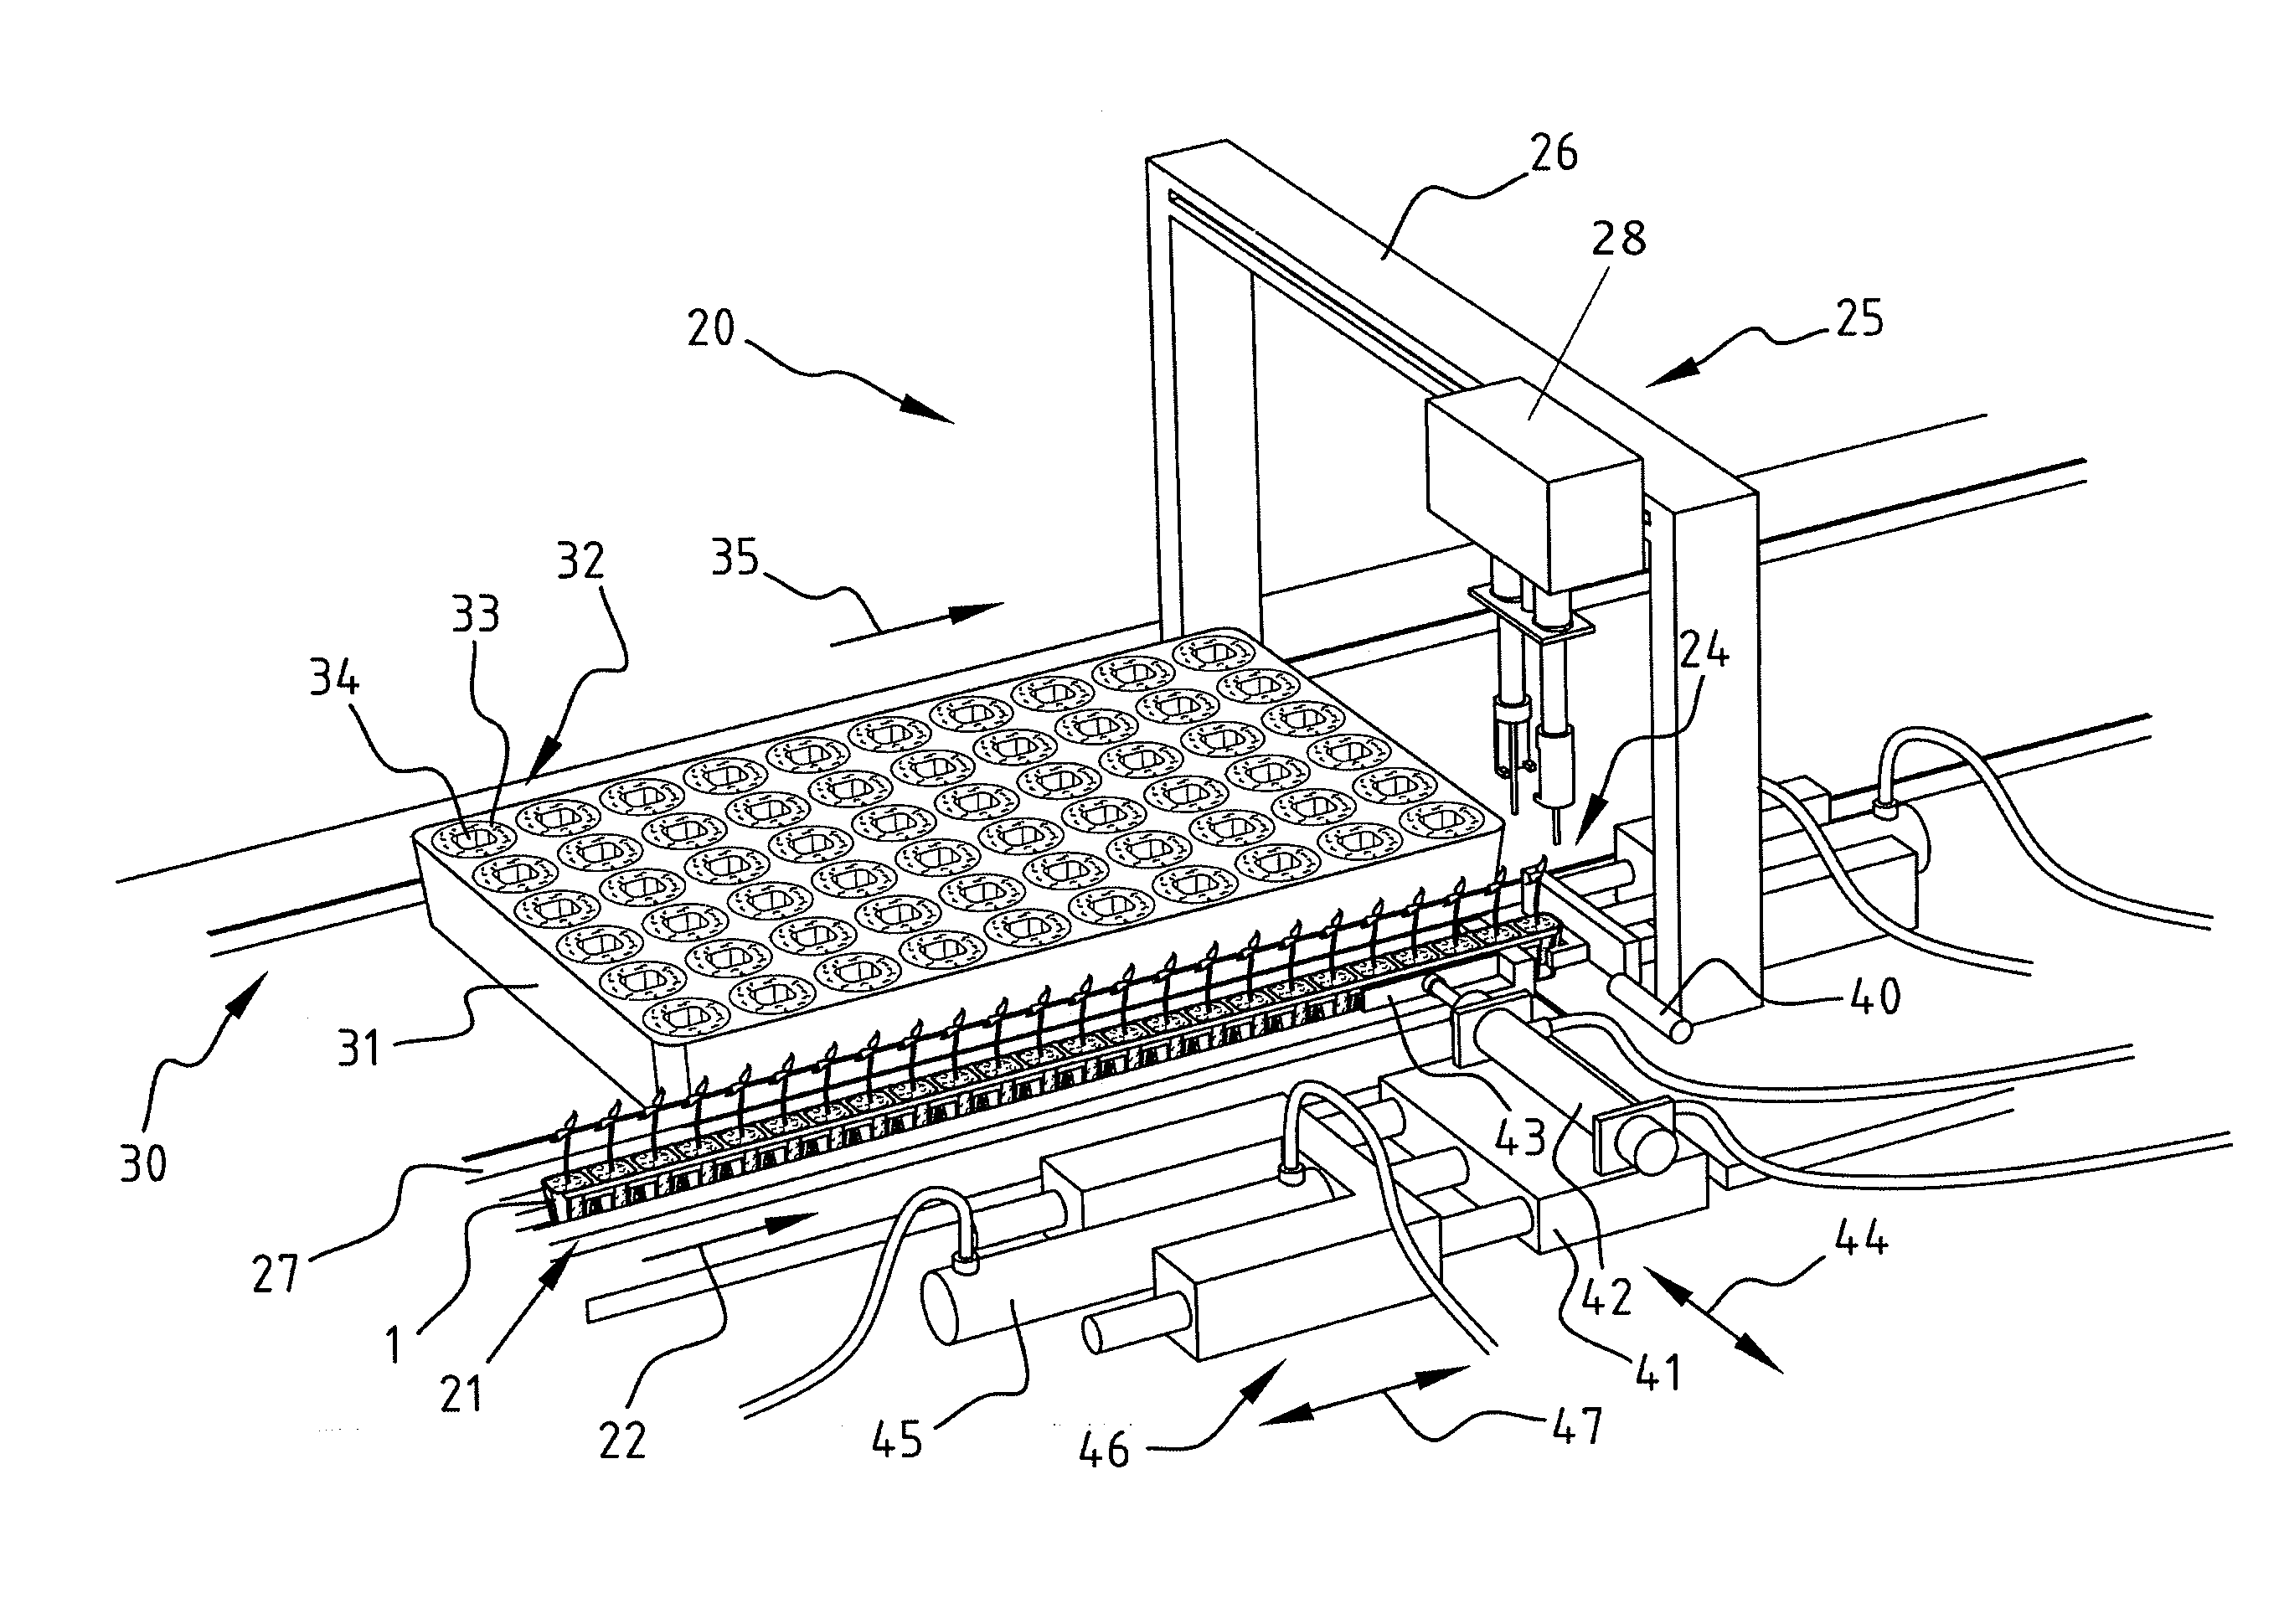 System and method for transferring and singularizing plant material in a container, container for plant material, use of a container for plant material